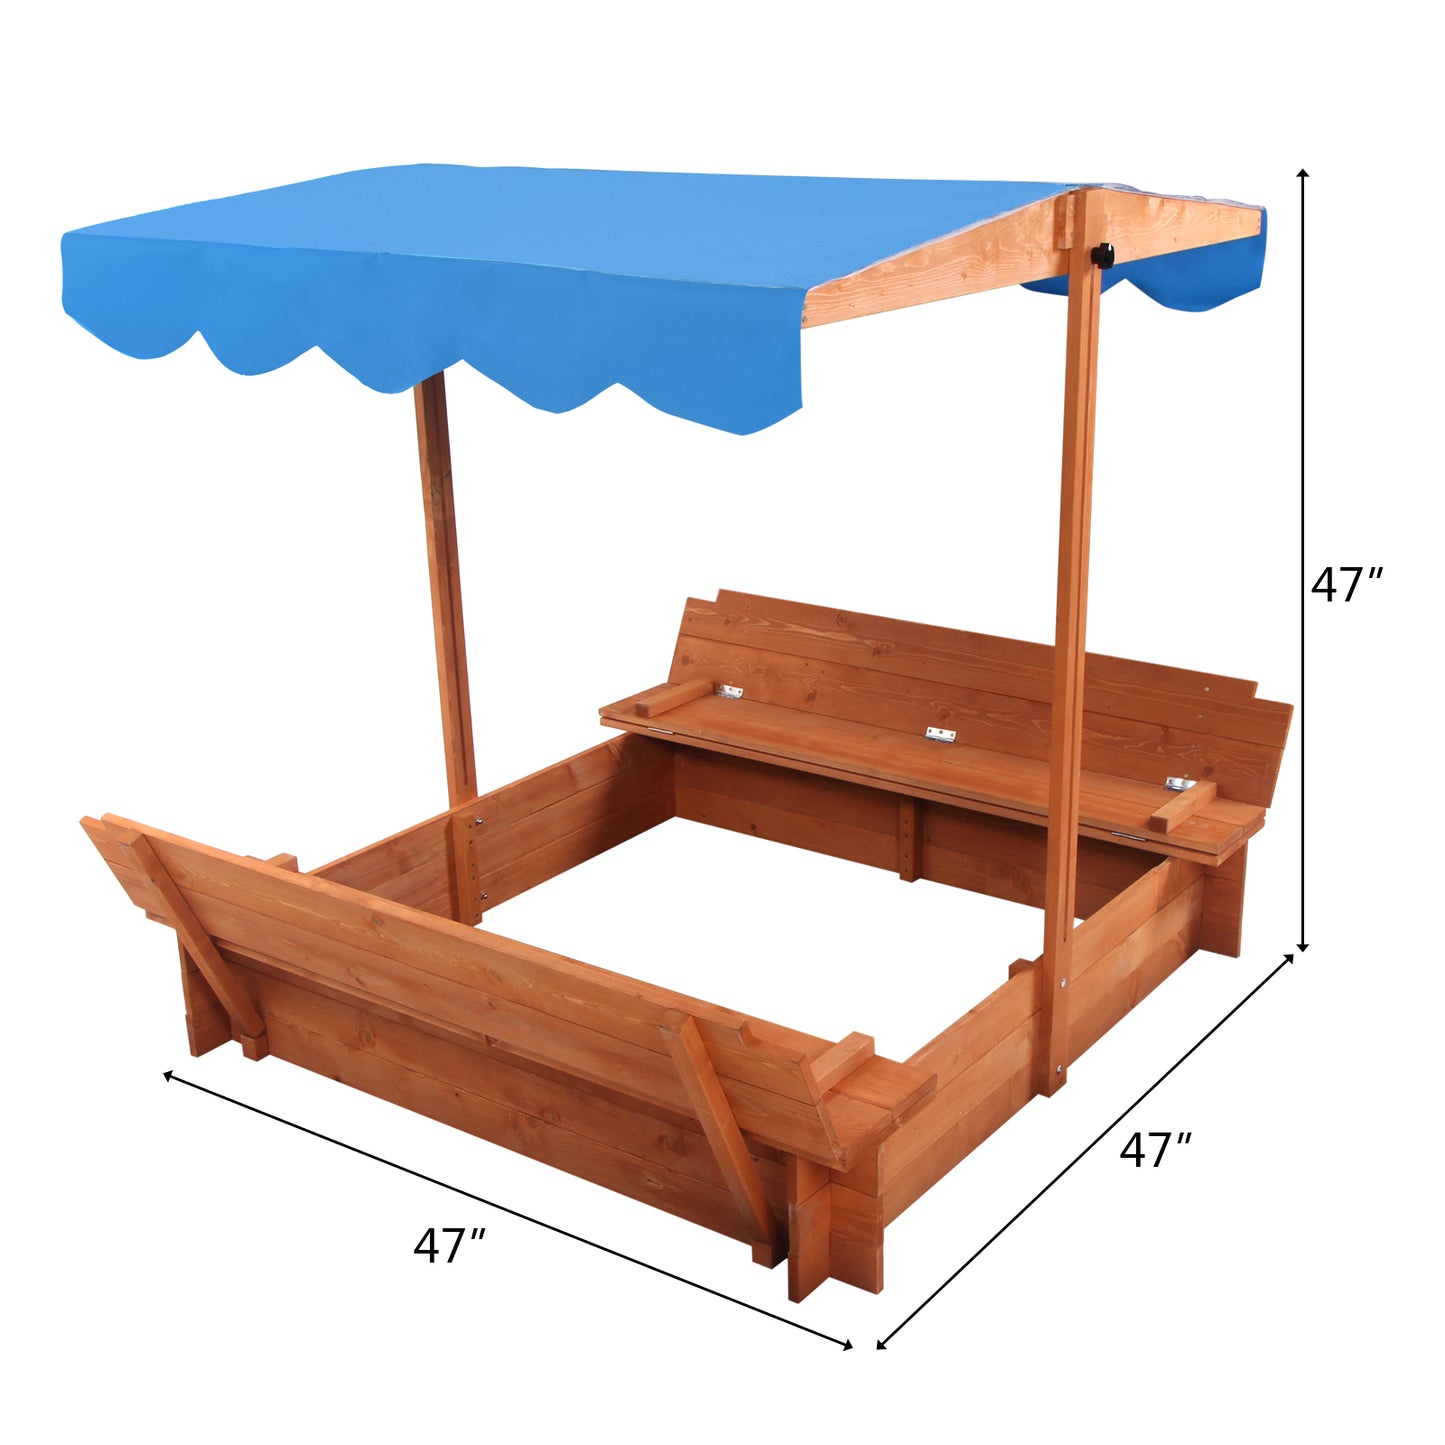 Wooden Sandbox with Convertible Cover Kids Outdoor Backyard Bench Play Sand Box